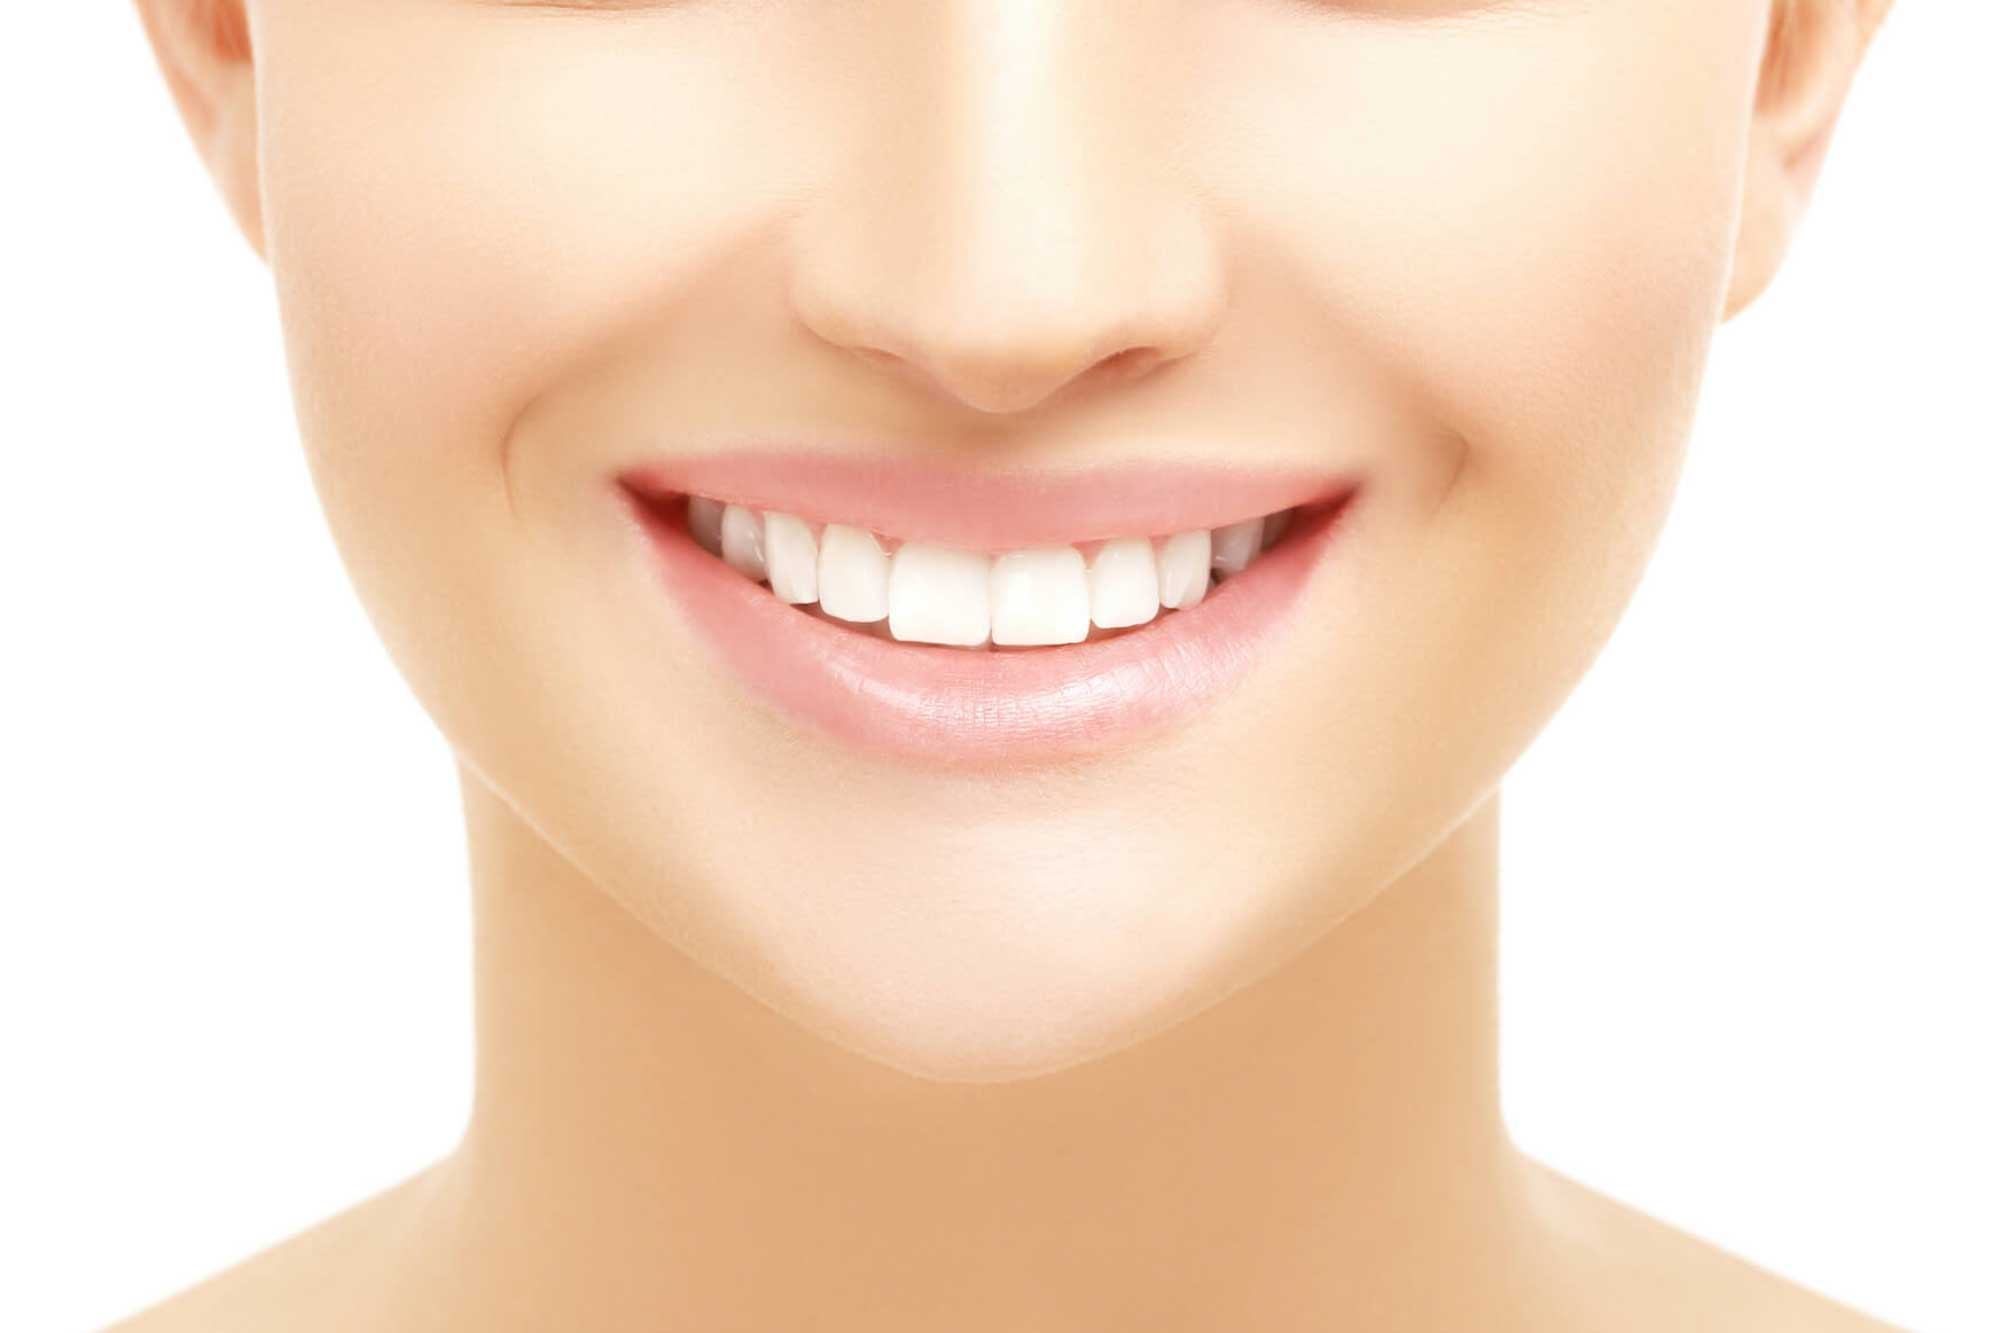 Close Up of Woman's Cheeks, Chin, and Smile